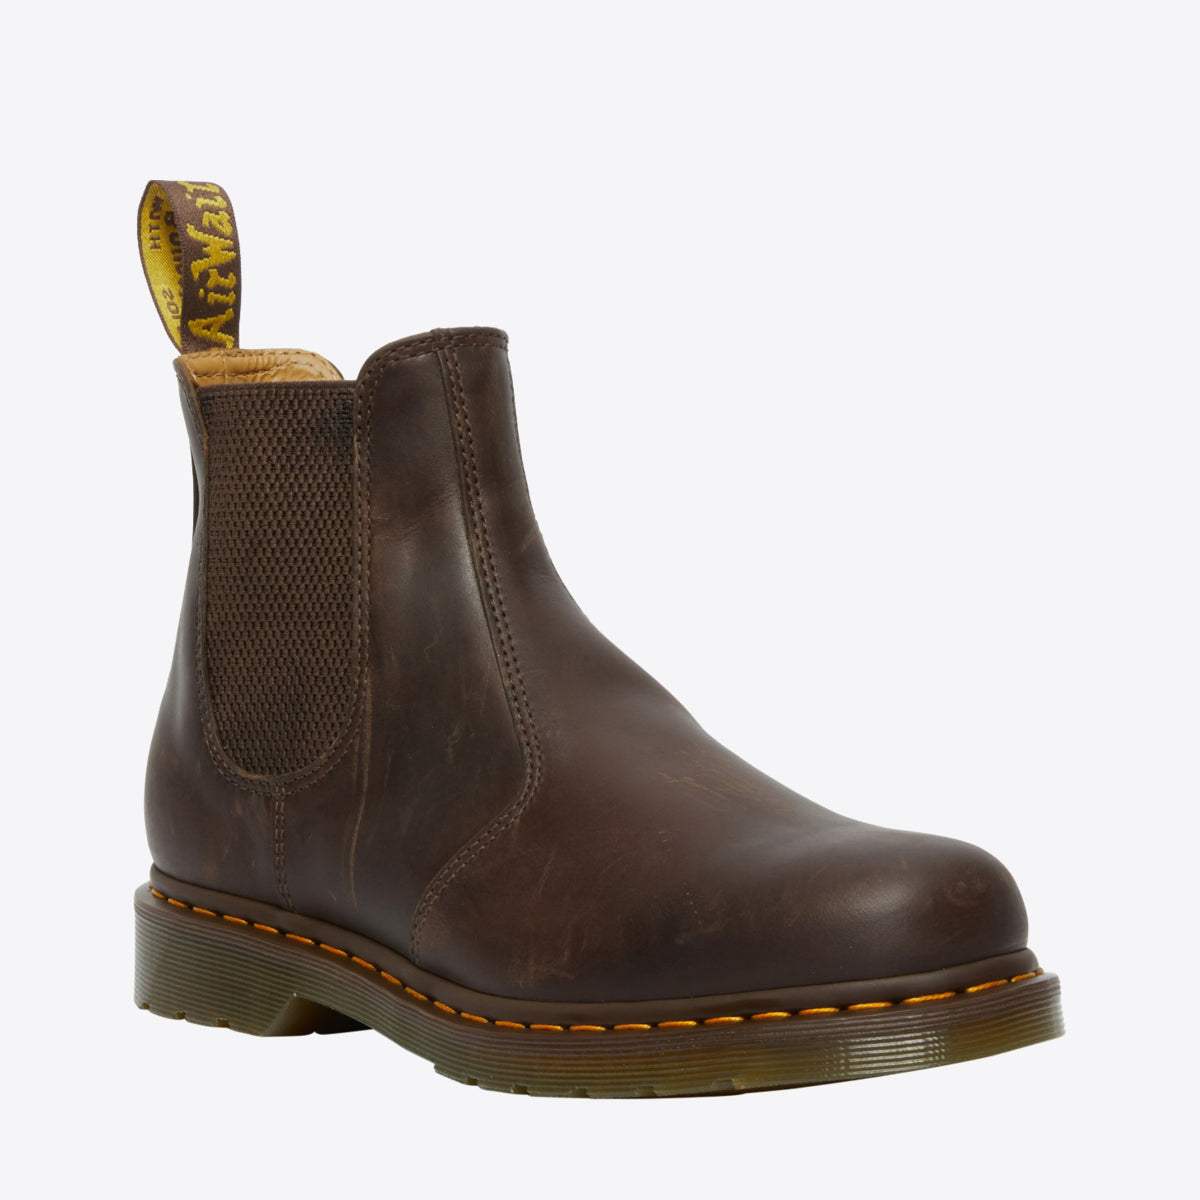 DR MARTENS 2976 Yellow Stitch Crazy Horse Chelsea Boot Dark Brown - Image 4